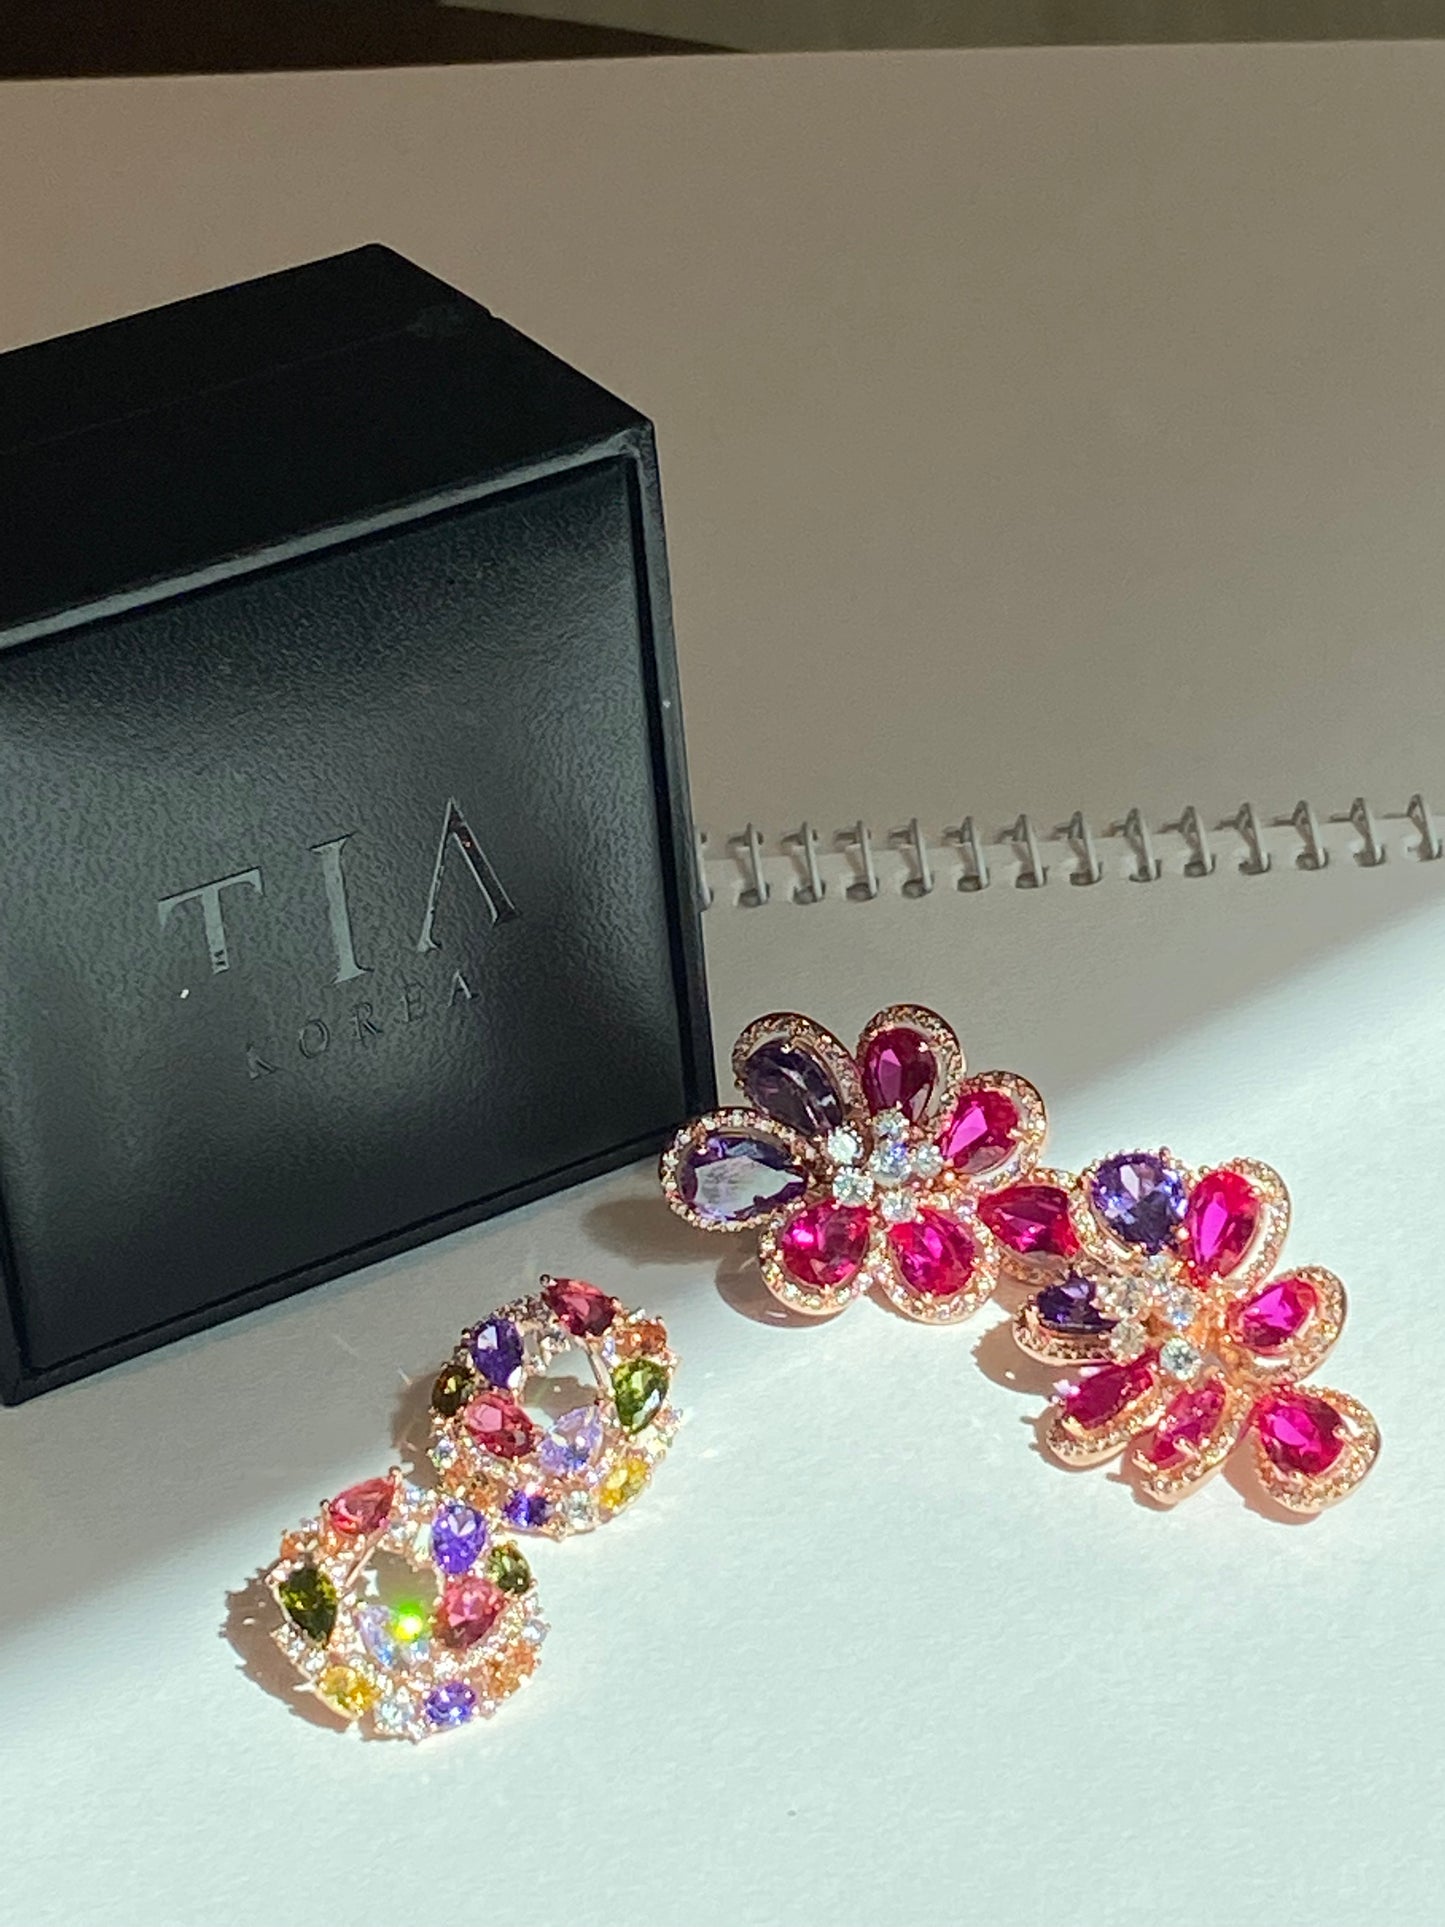 Daily Multi coloured gem with round shape earrings